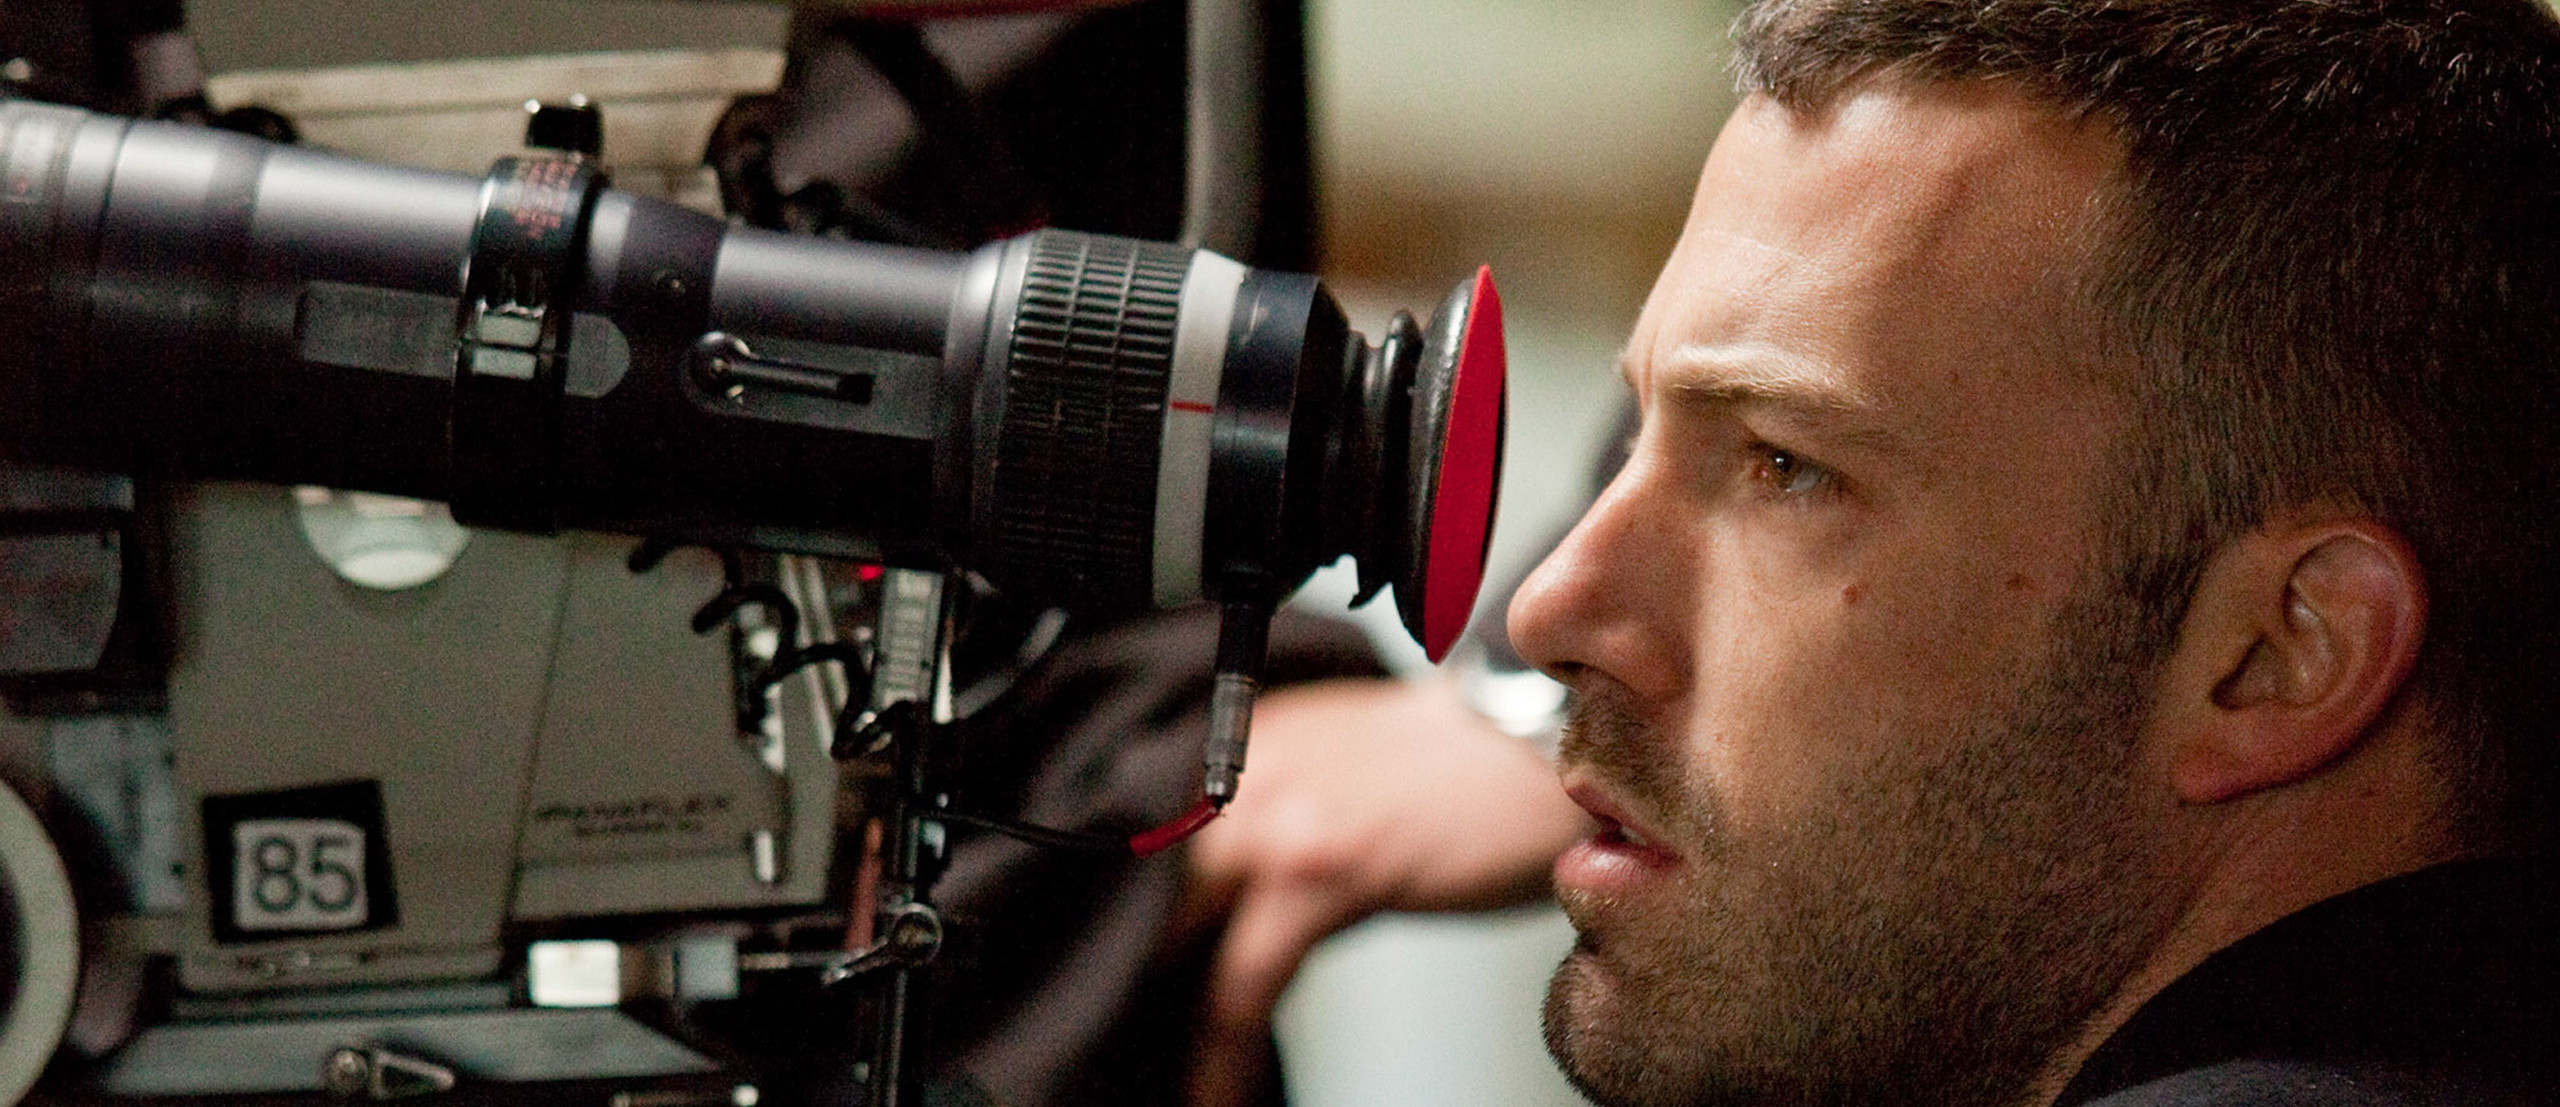 Director/Screenwriter/Actor BEN AFFLECK on location during the filming of Warner Bros. Pictures' and Legendary Pictures' crime drama "The Town," distributed by Warner Bros. Pictures. Photo by Claire Folger